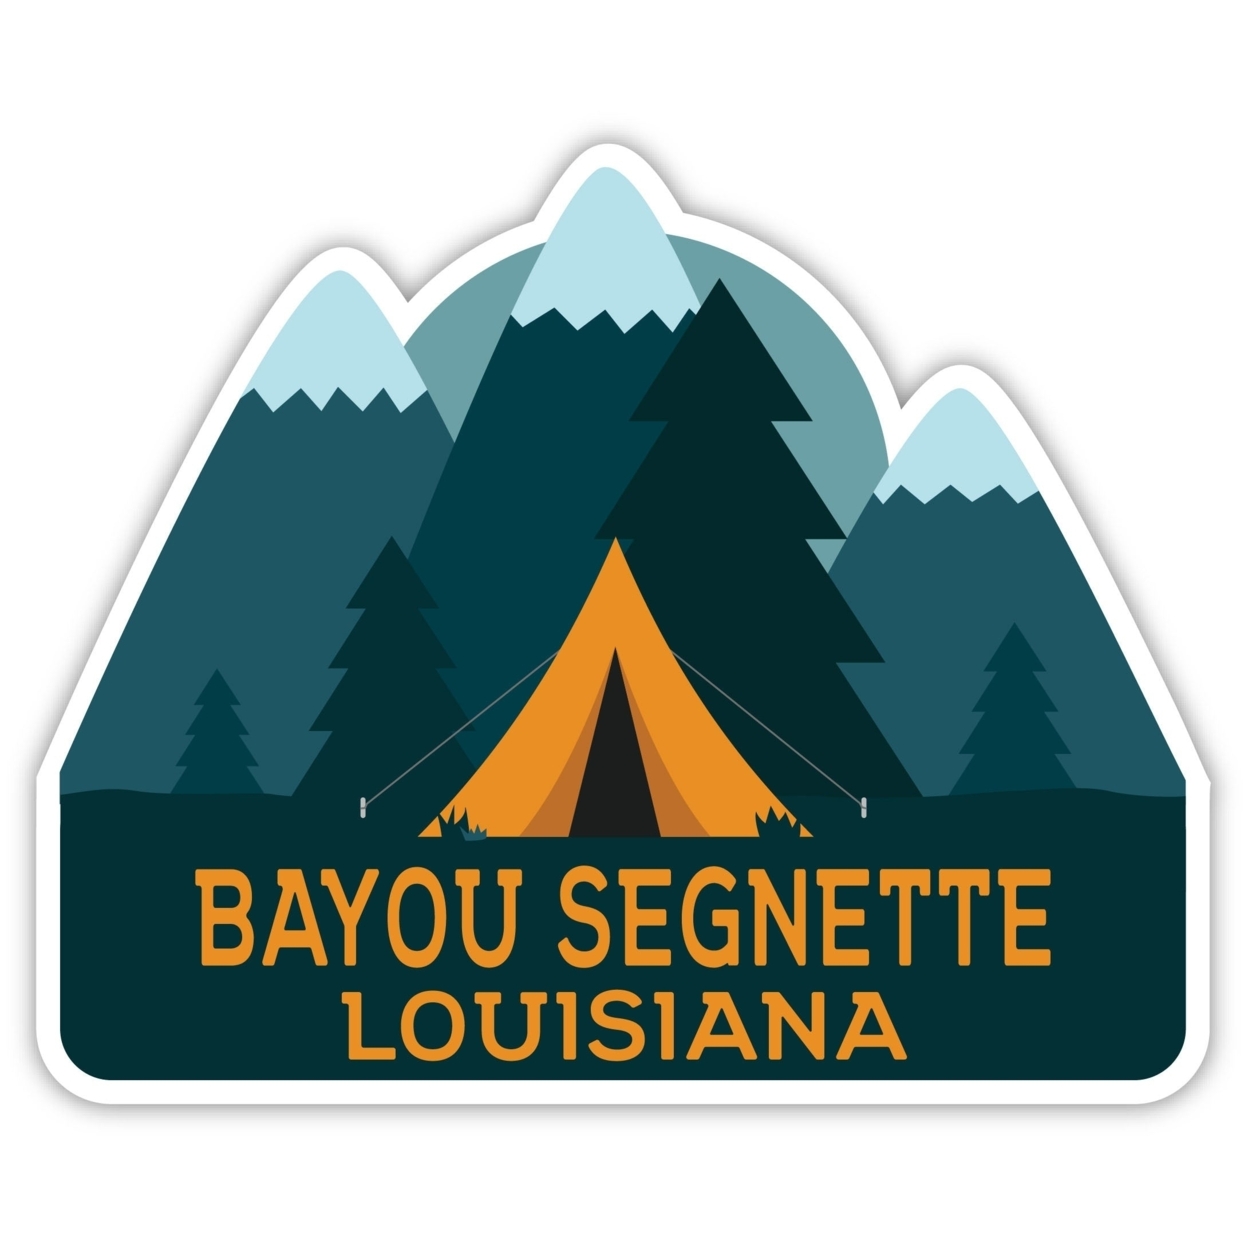 Bayou Segnette Louisiana Souvenir Decorative Stickers (Choose Theme And Size) - 4-Pack, 4-Inch, Tent